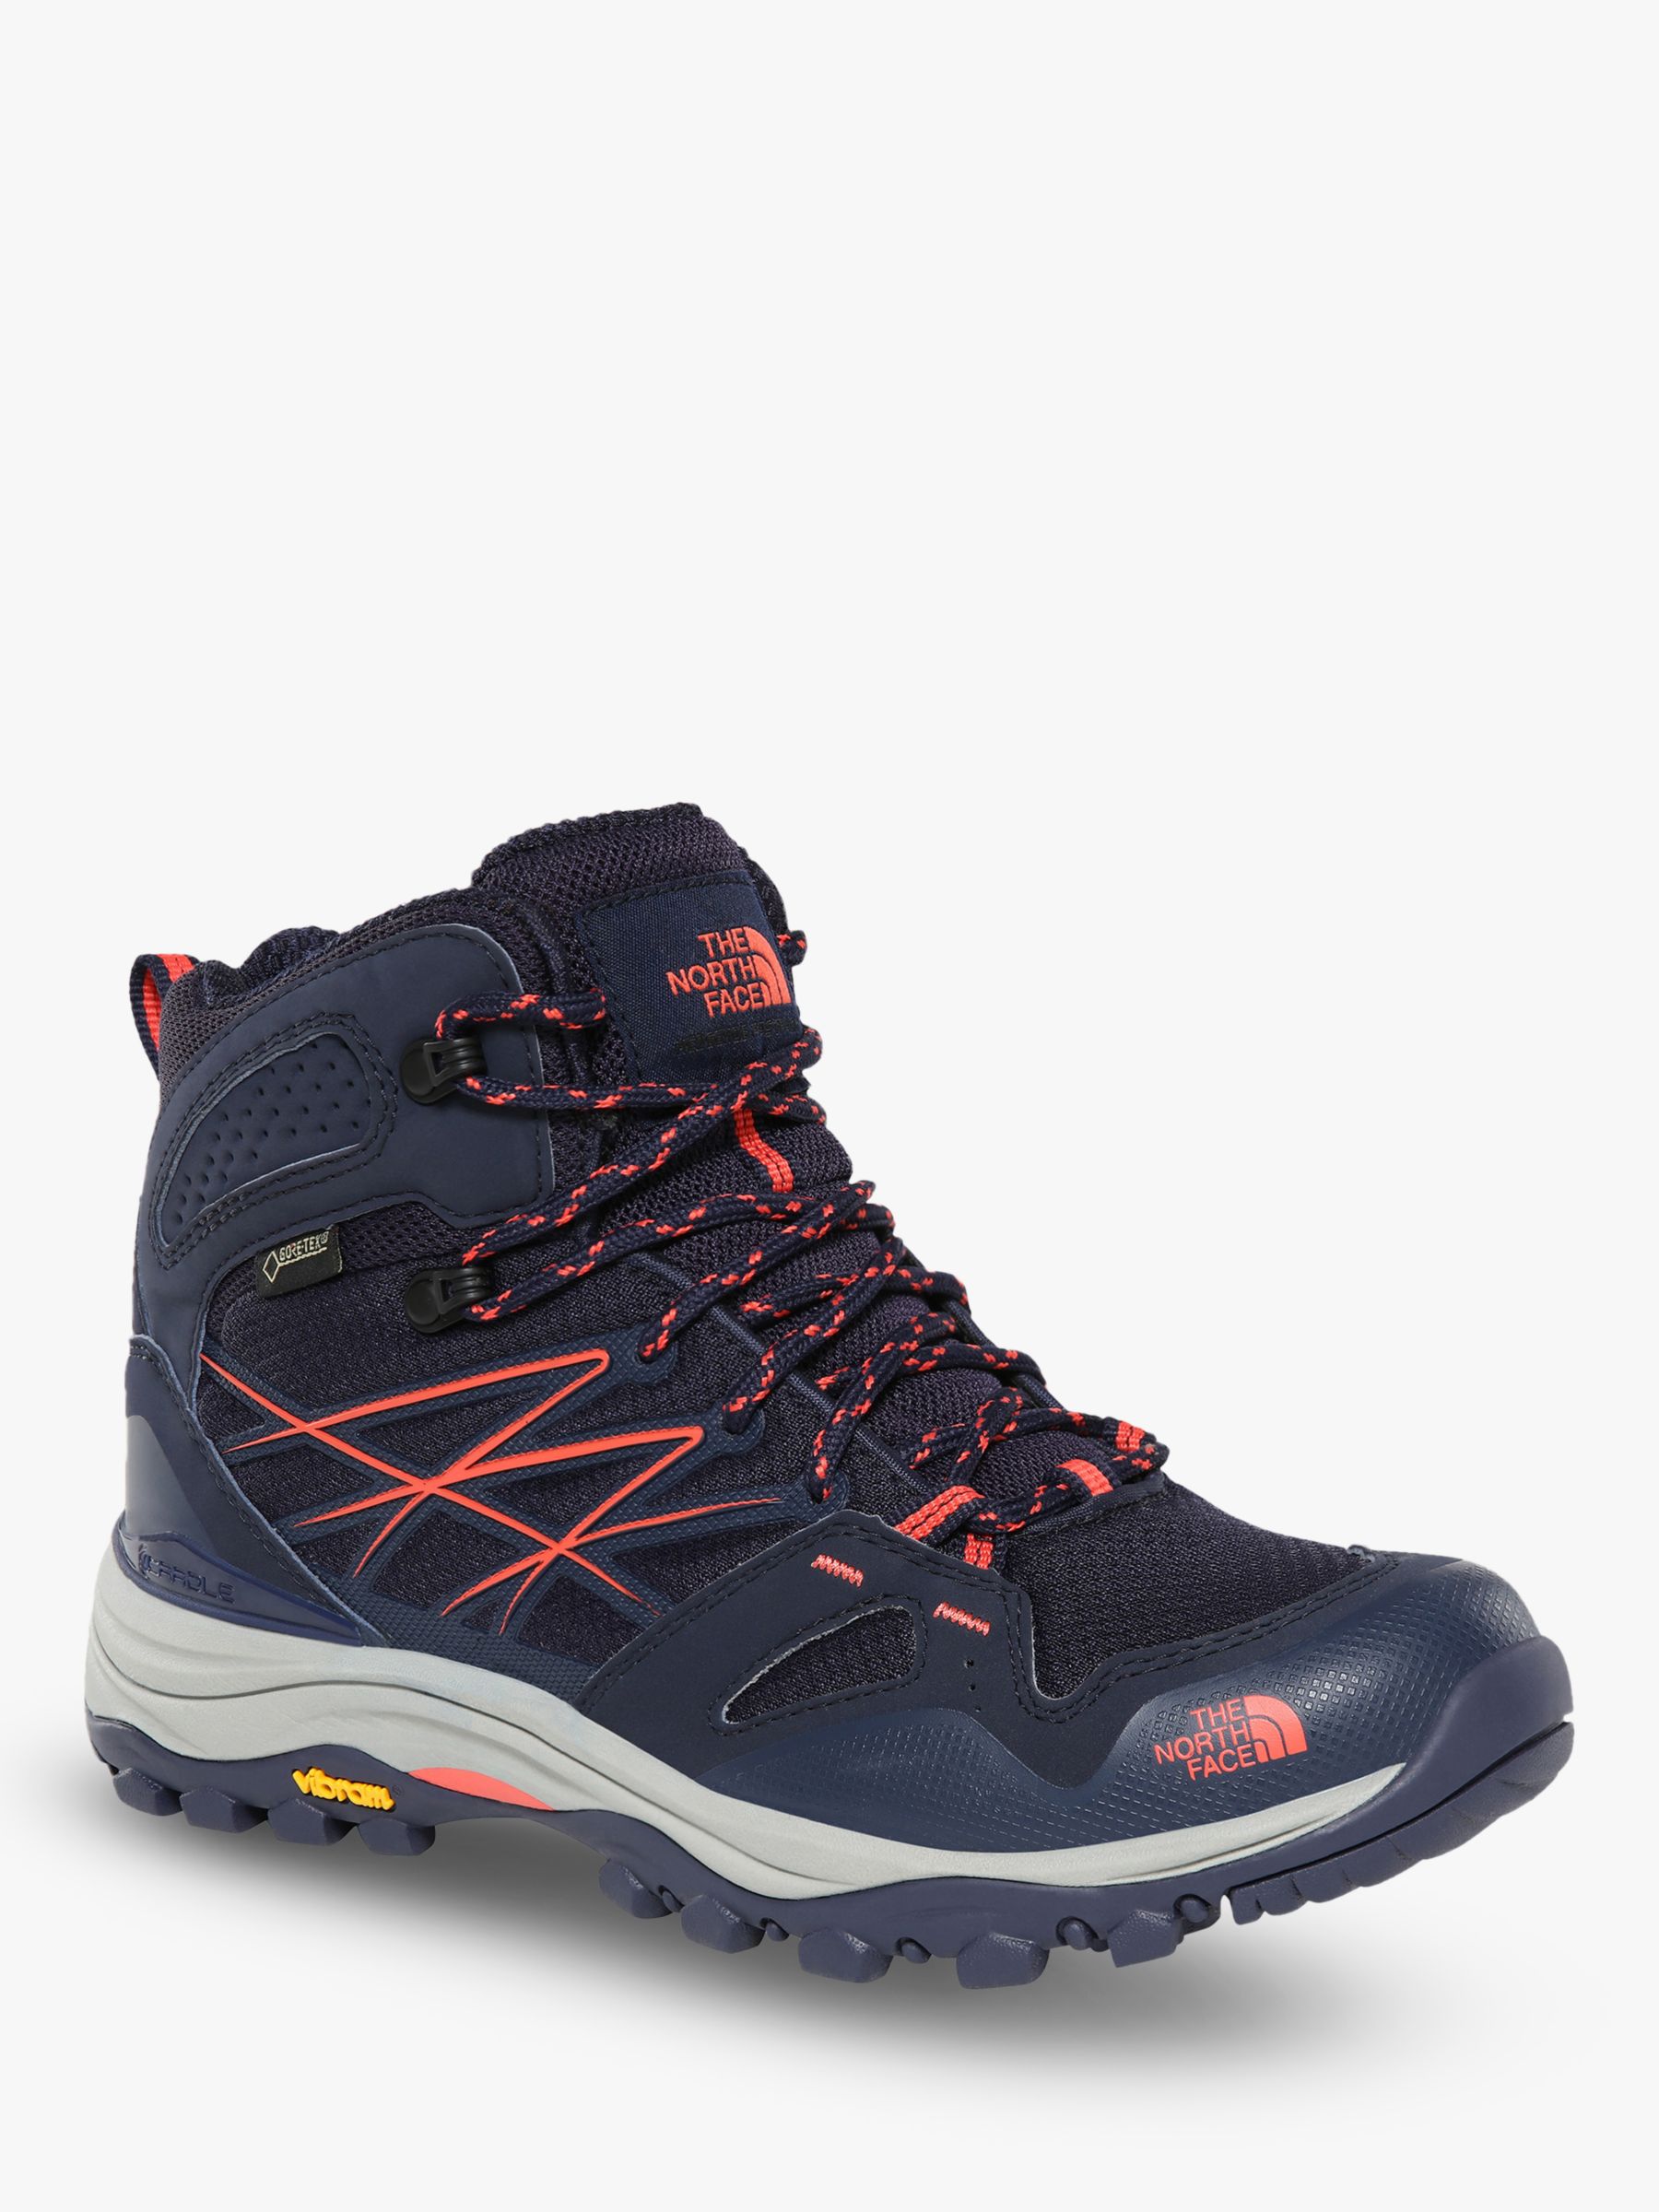 north face ladies walking boots